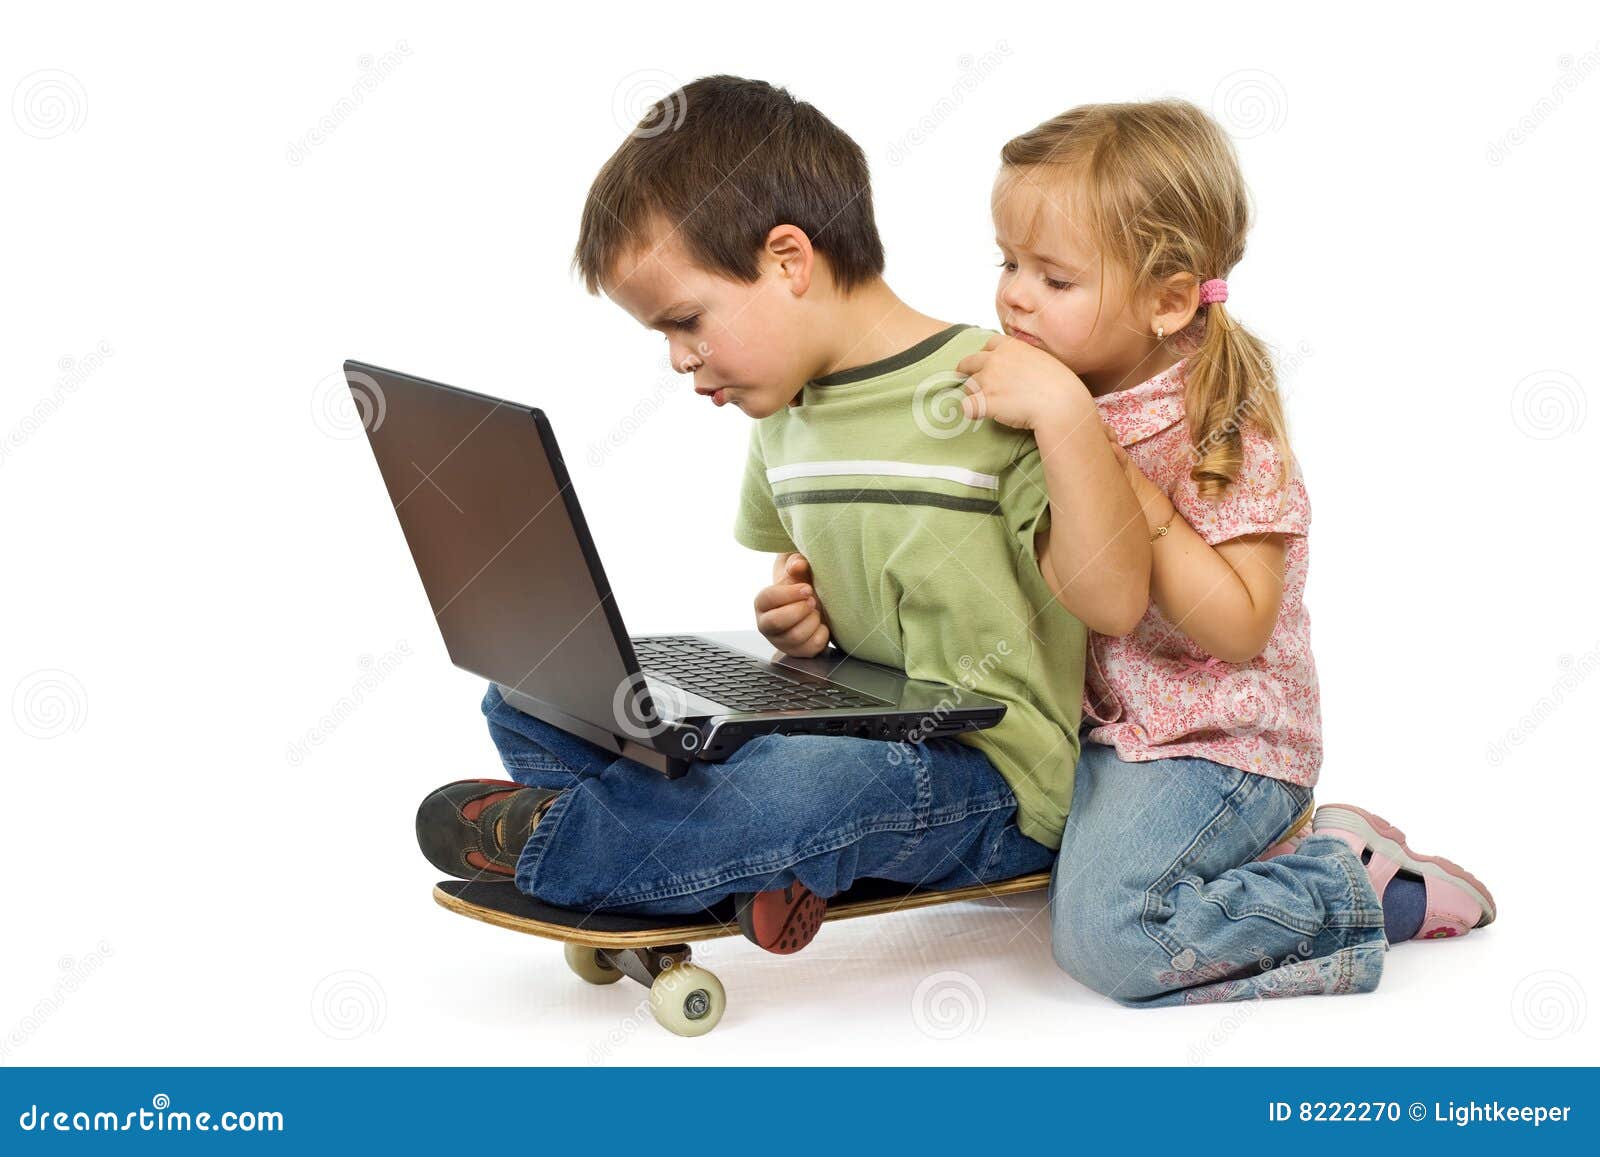 children rival for using the laptop